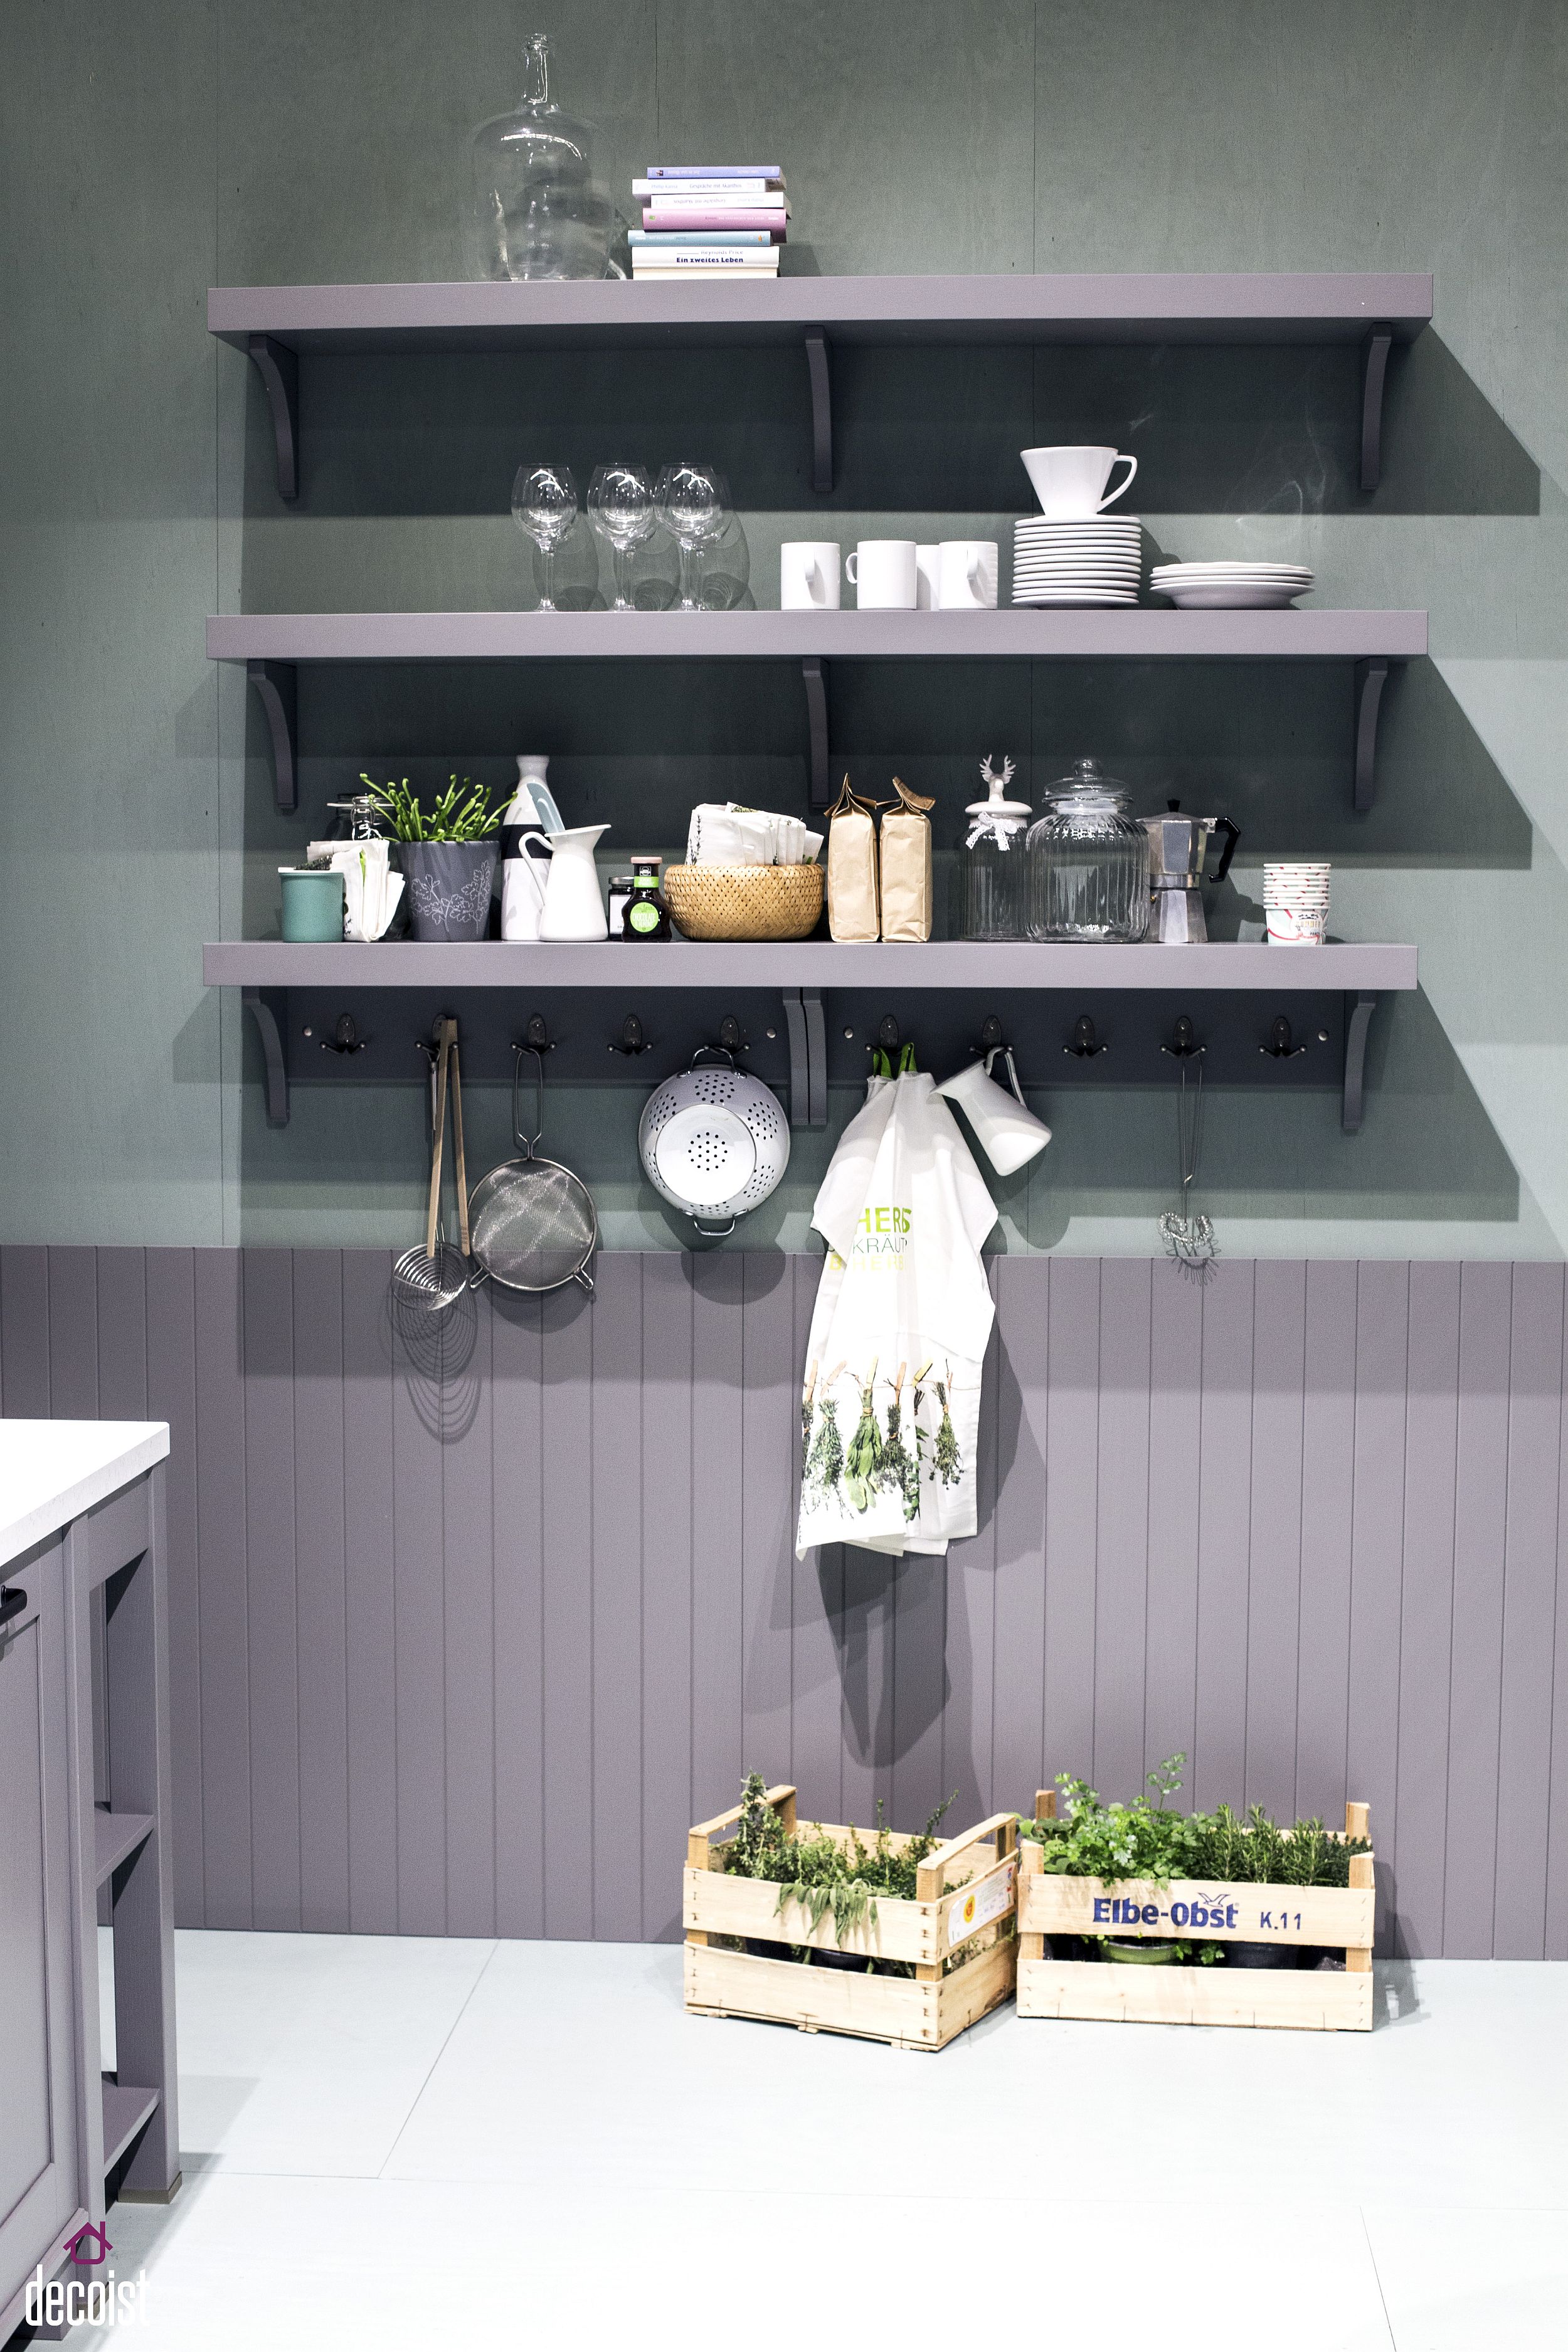 Slim-floating-shelves-in-gray-create-a-smart-and-space-savvy-kitchen-display